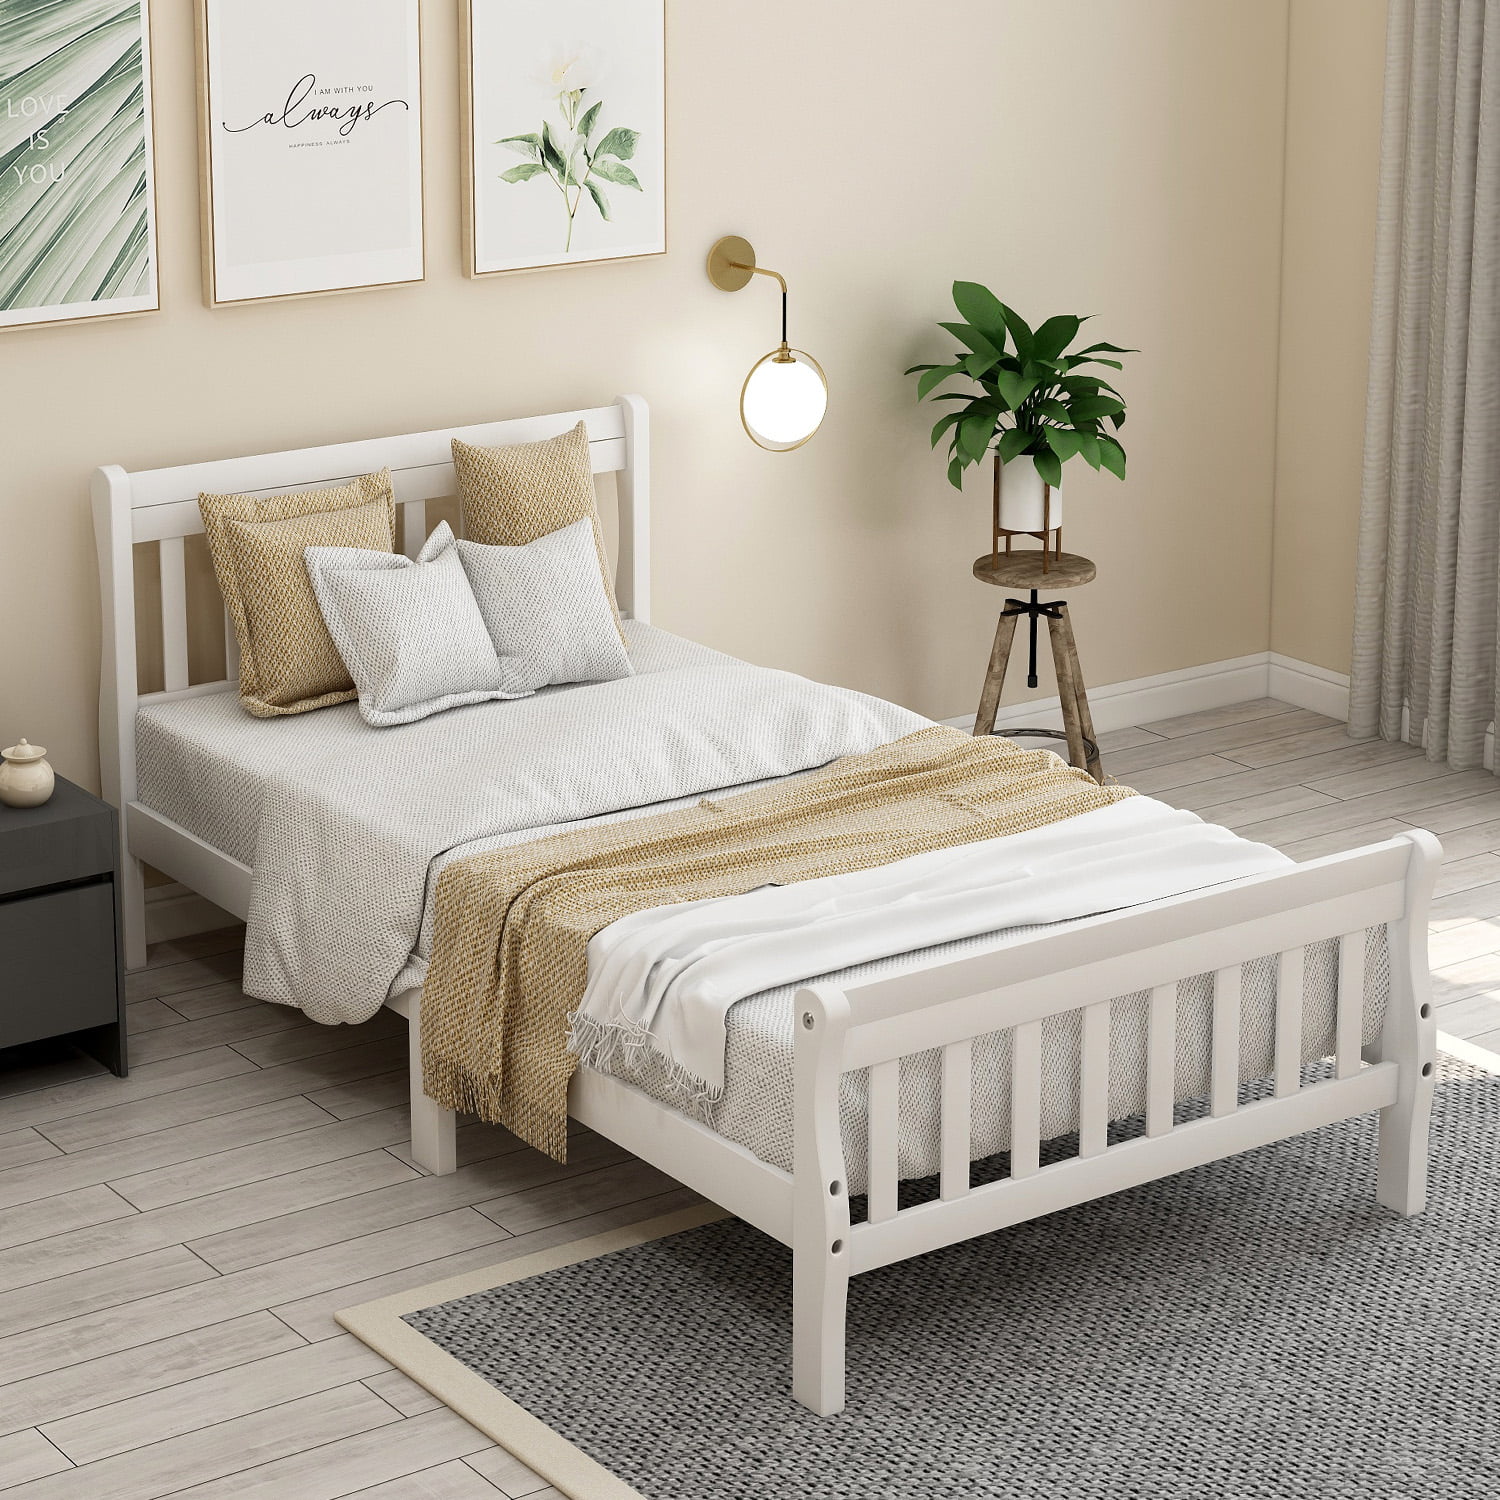 Details about   Twin Full Queen Size Wooden Bed Frame Mattress Foundation w/Headboard Footboard 